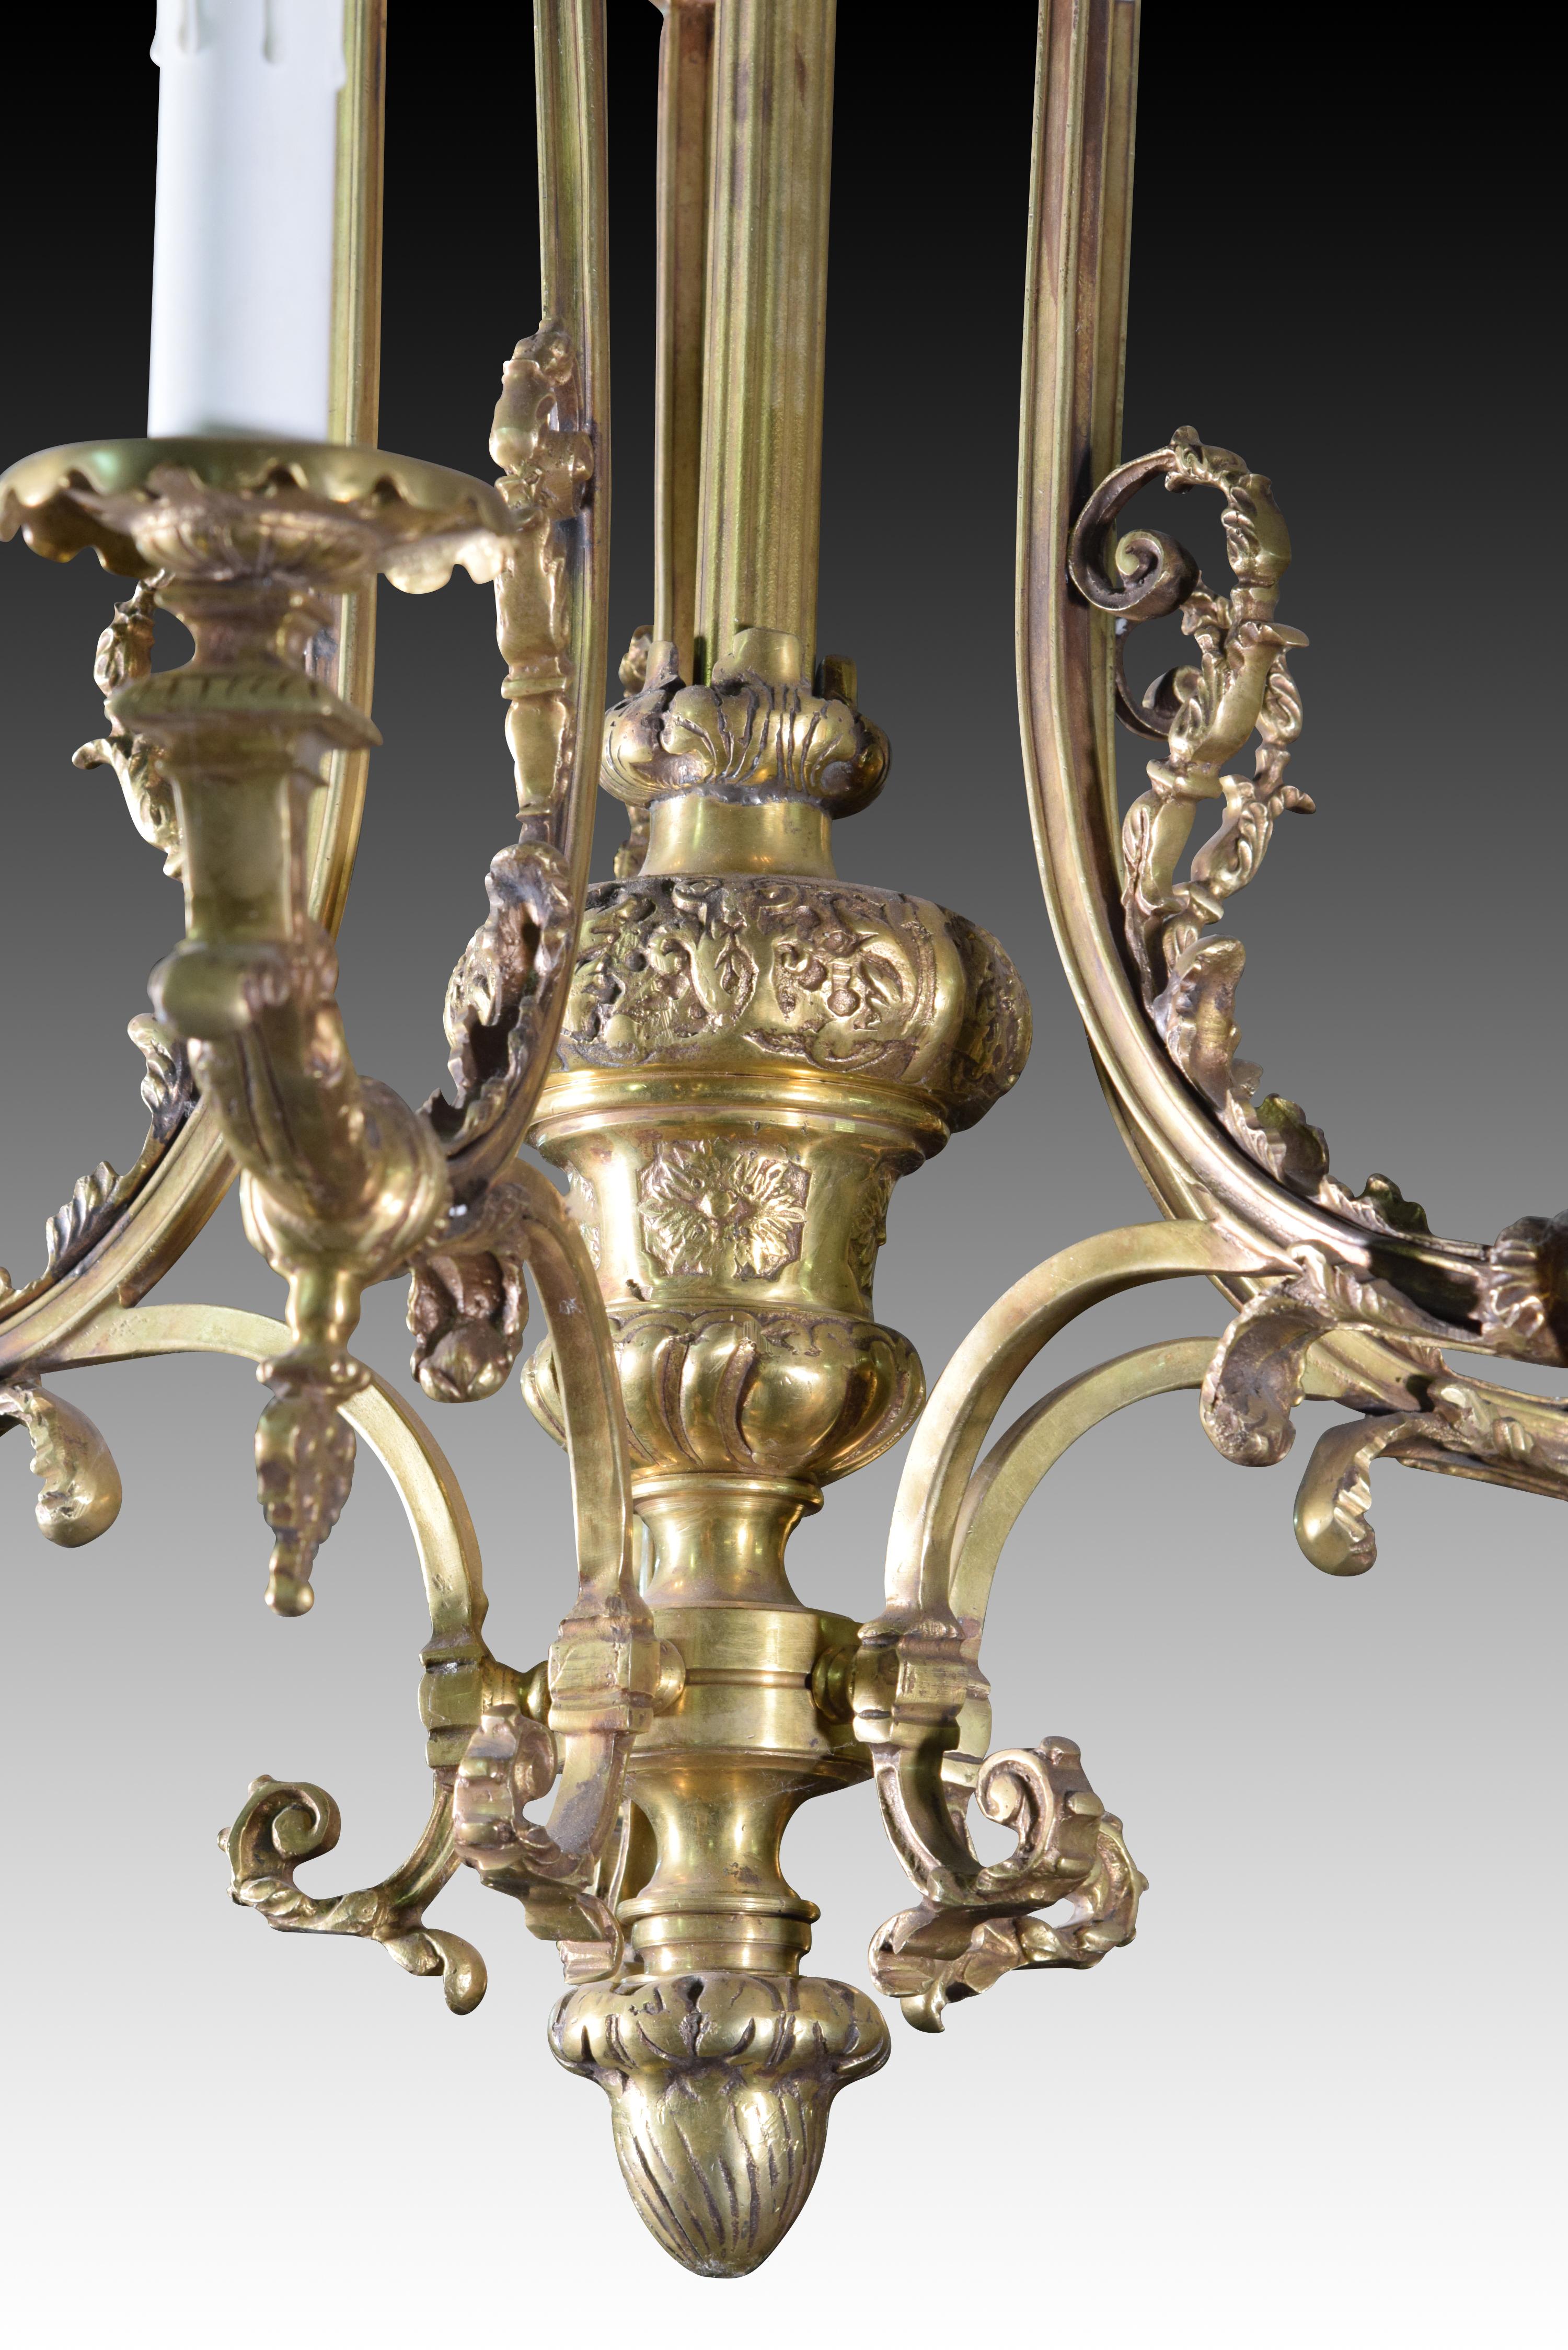 Ceiling lamp with six lights. Bronze with antique finish and glass.
 The central stem is decorated with vases, veneered shapes and vegetal scrolls. From its upper part emerge several buttons decorated with ovals from which stems curved with scrolls